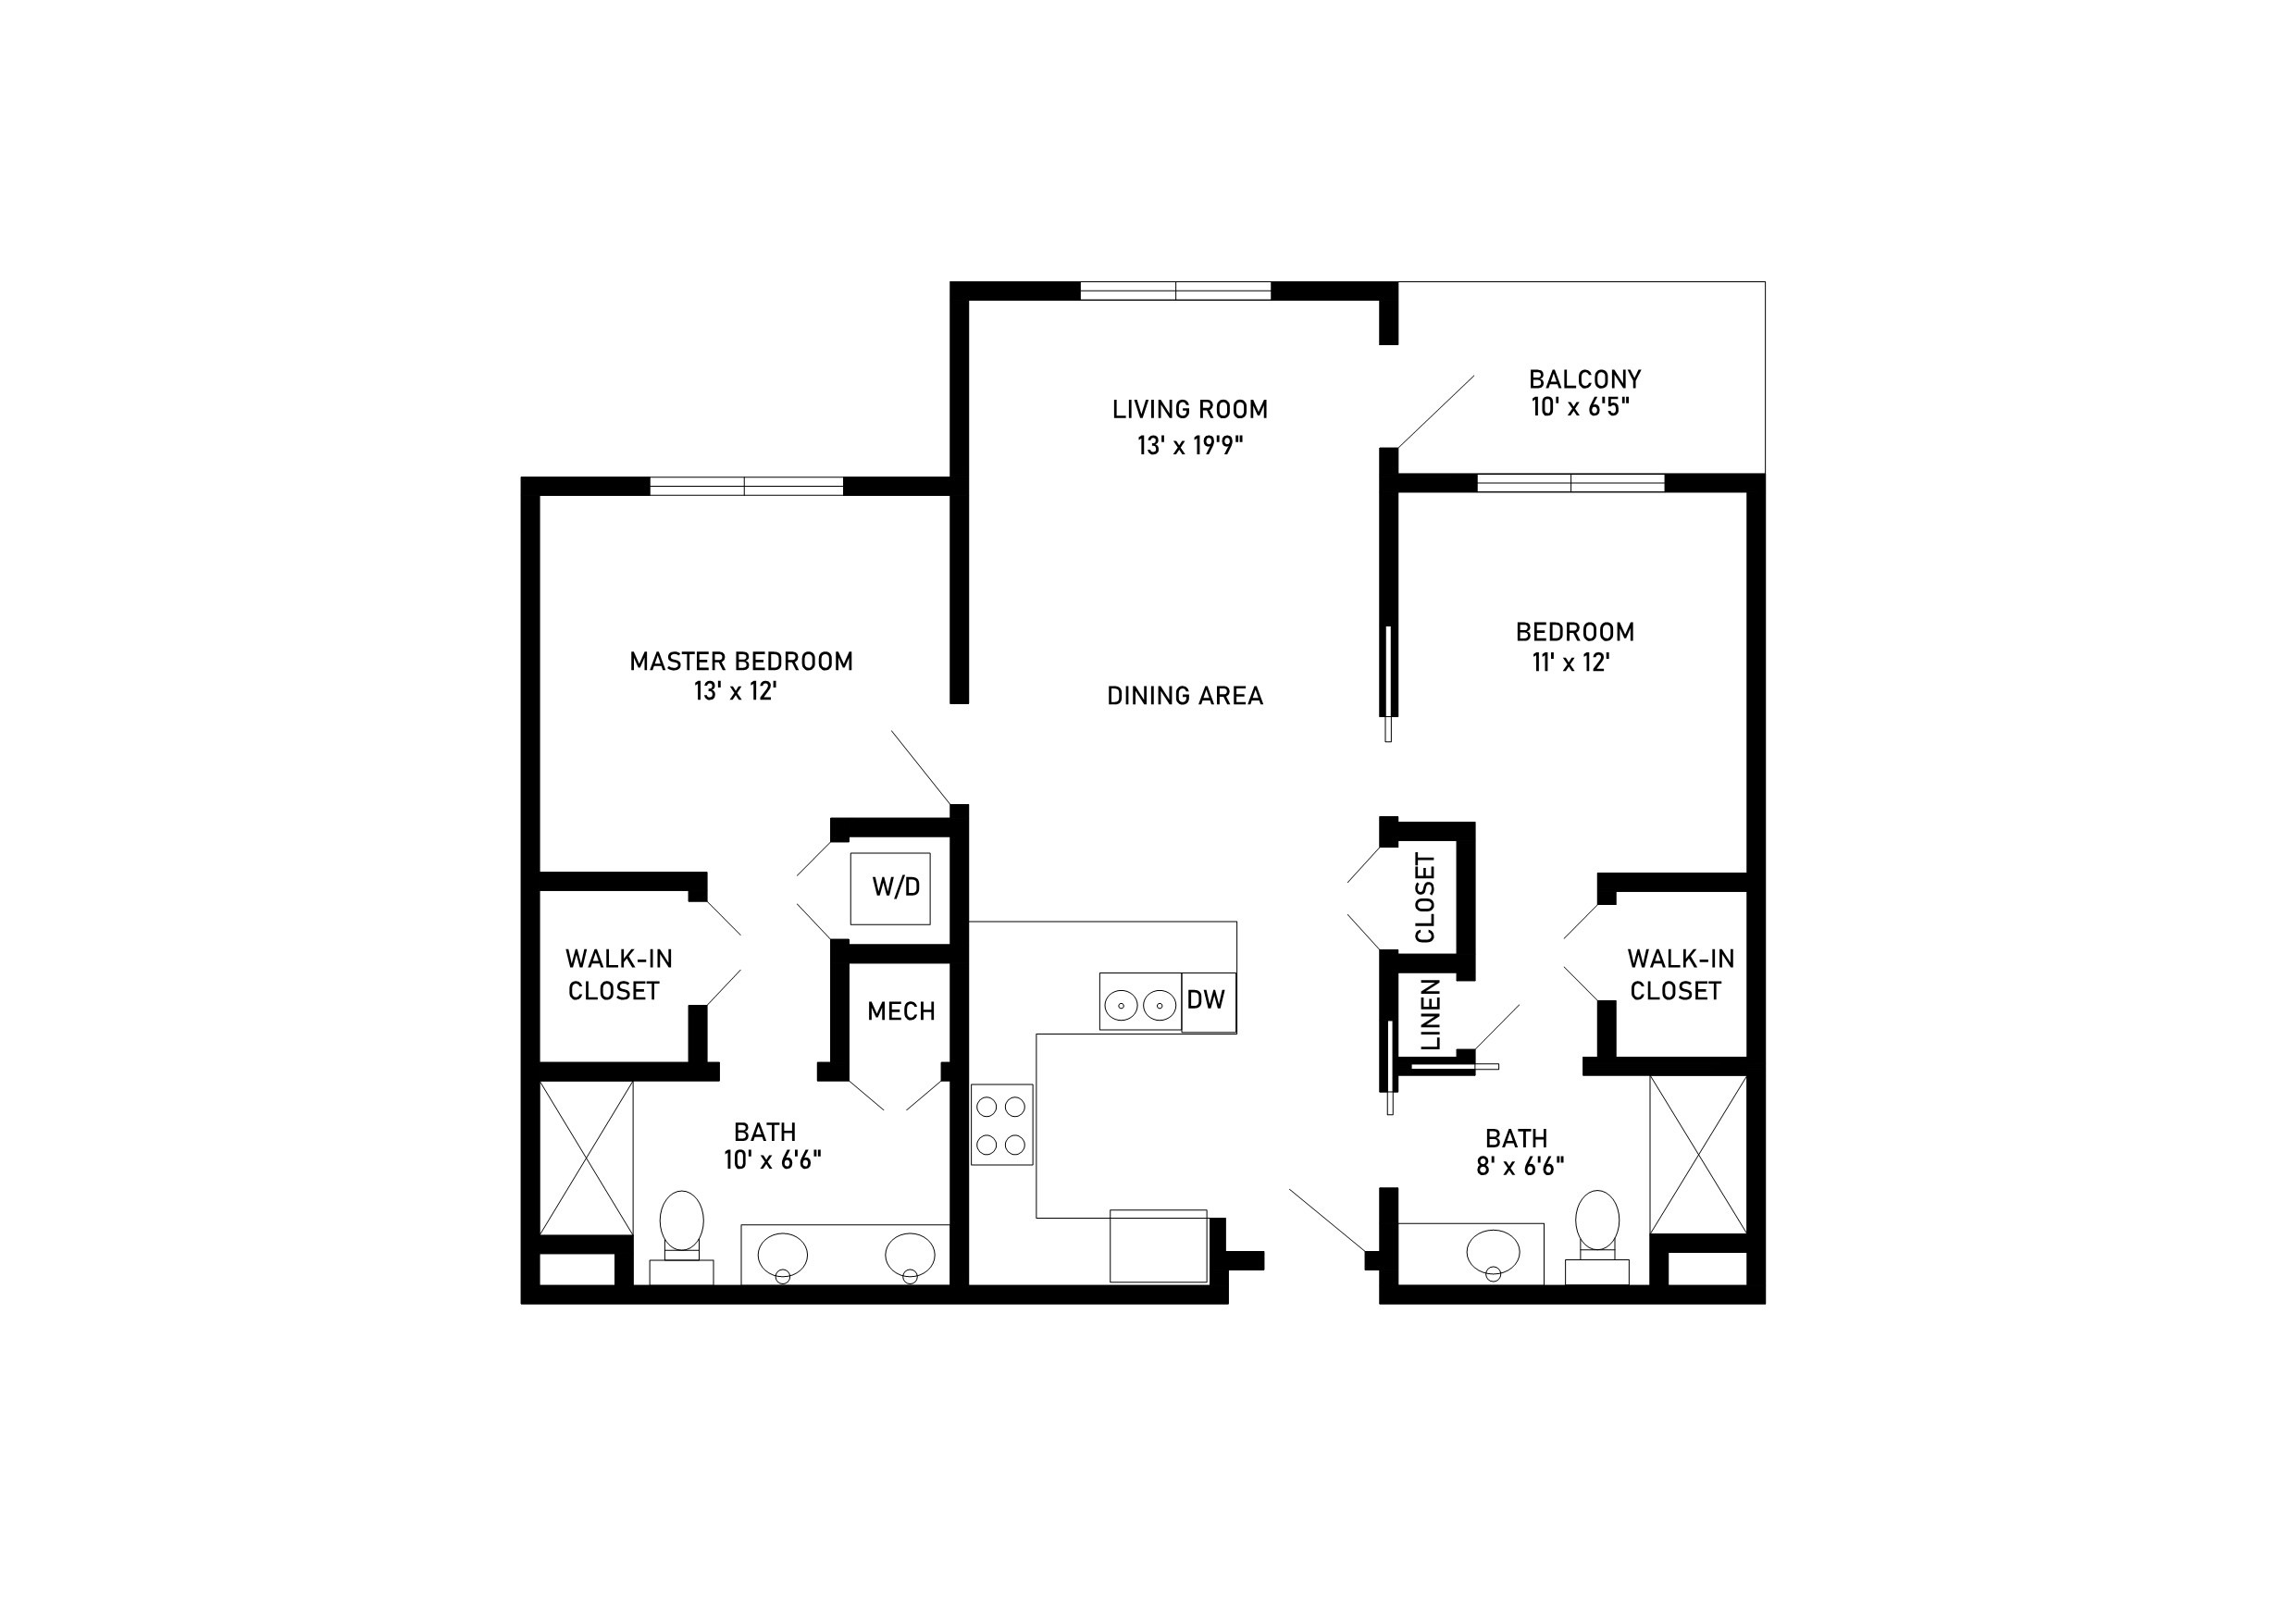 Thumbnail image town center 2 bed apartment 1054 square feet